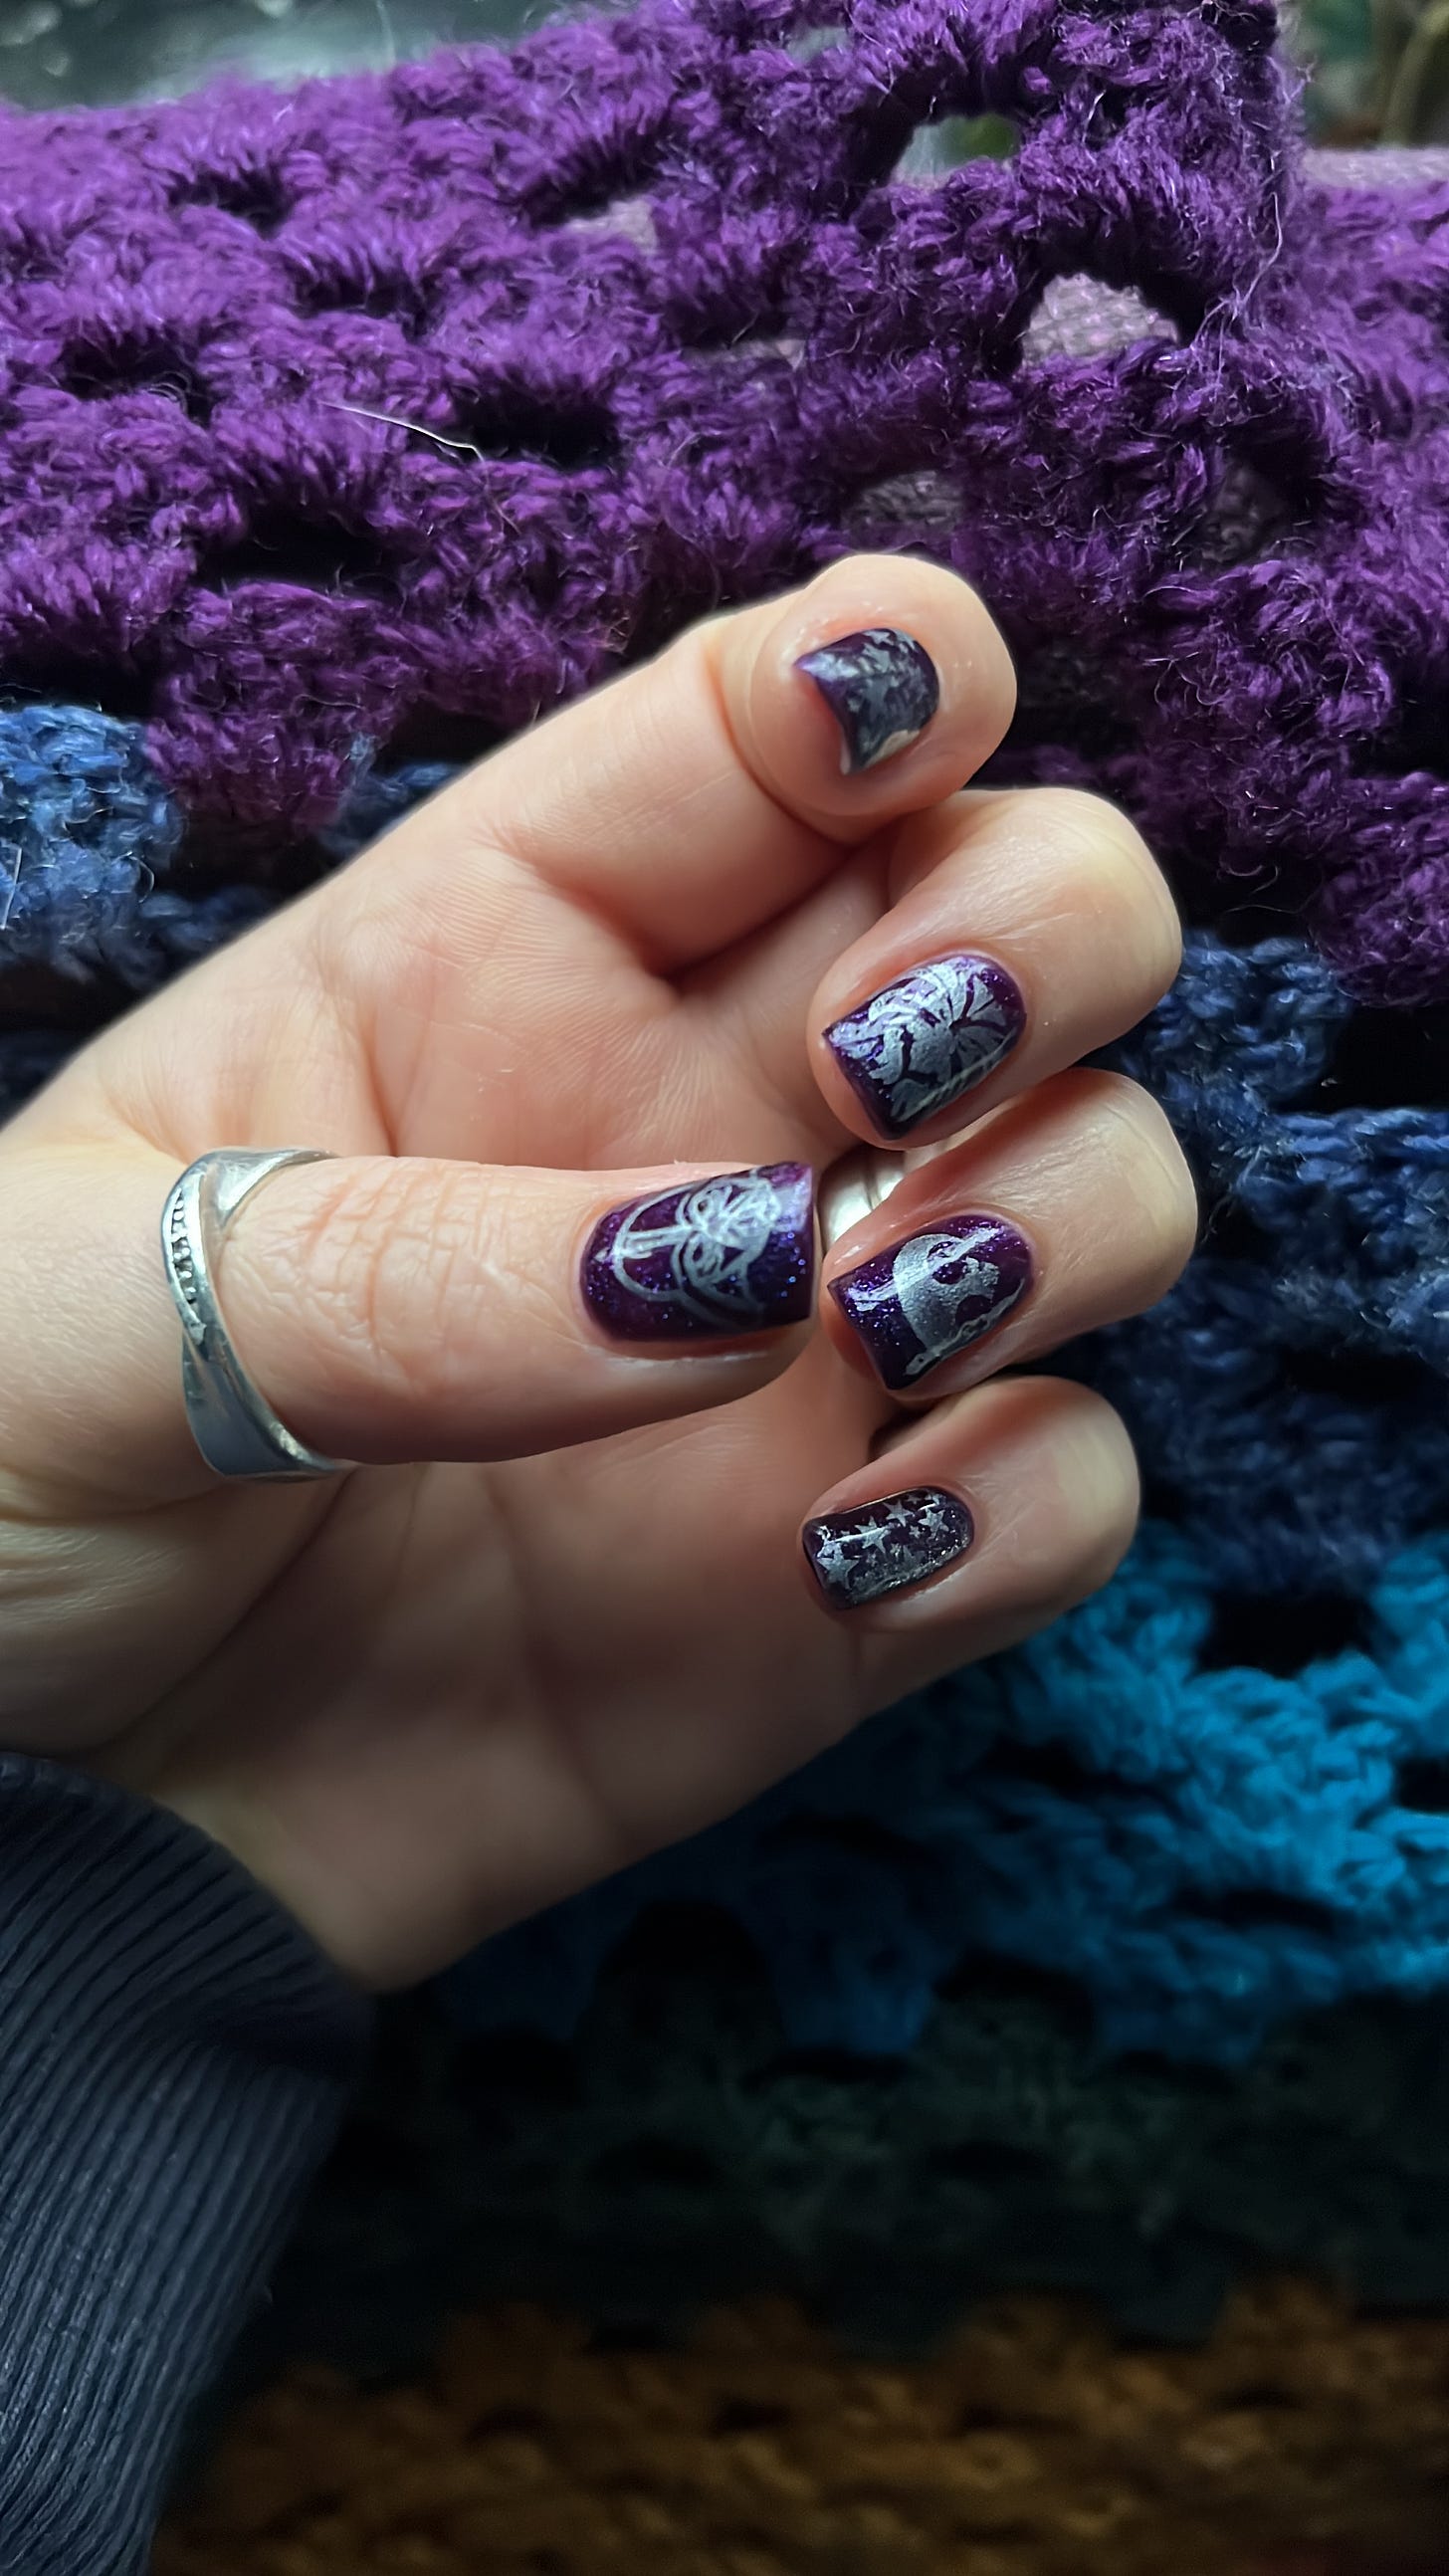 A picture of purple nails with star wars motifs